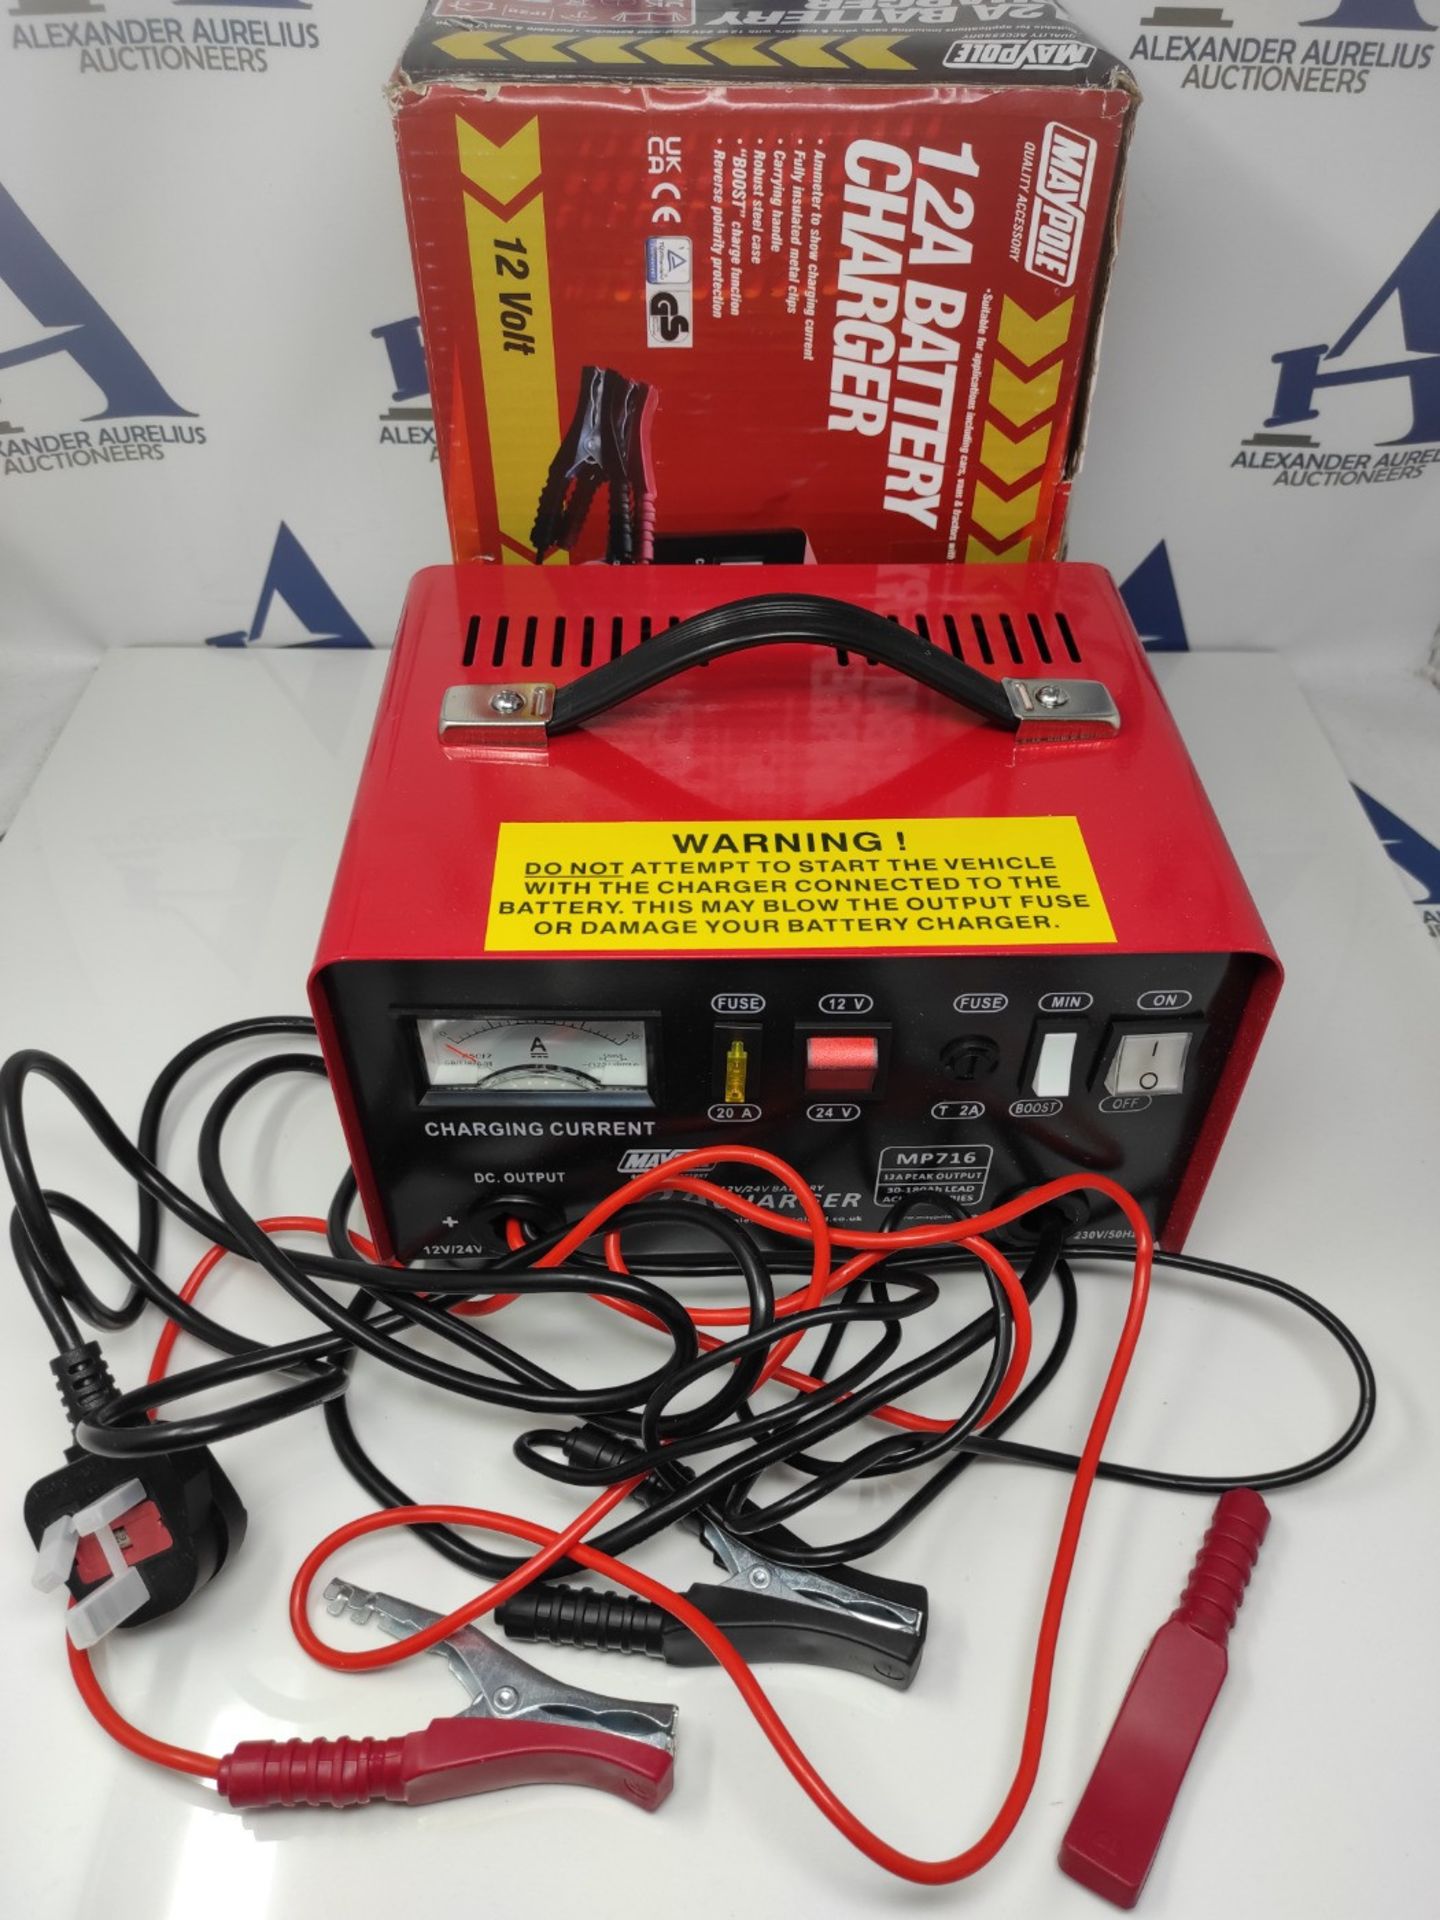 Maypole MP716 12A Metal Battery Charger 12/24V - Red/white - Image 2 of 2